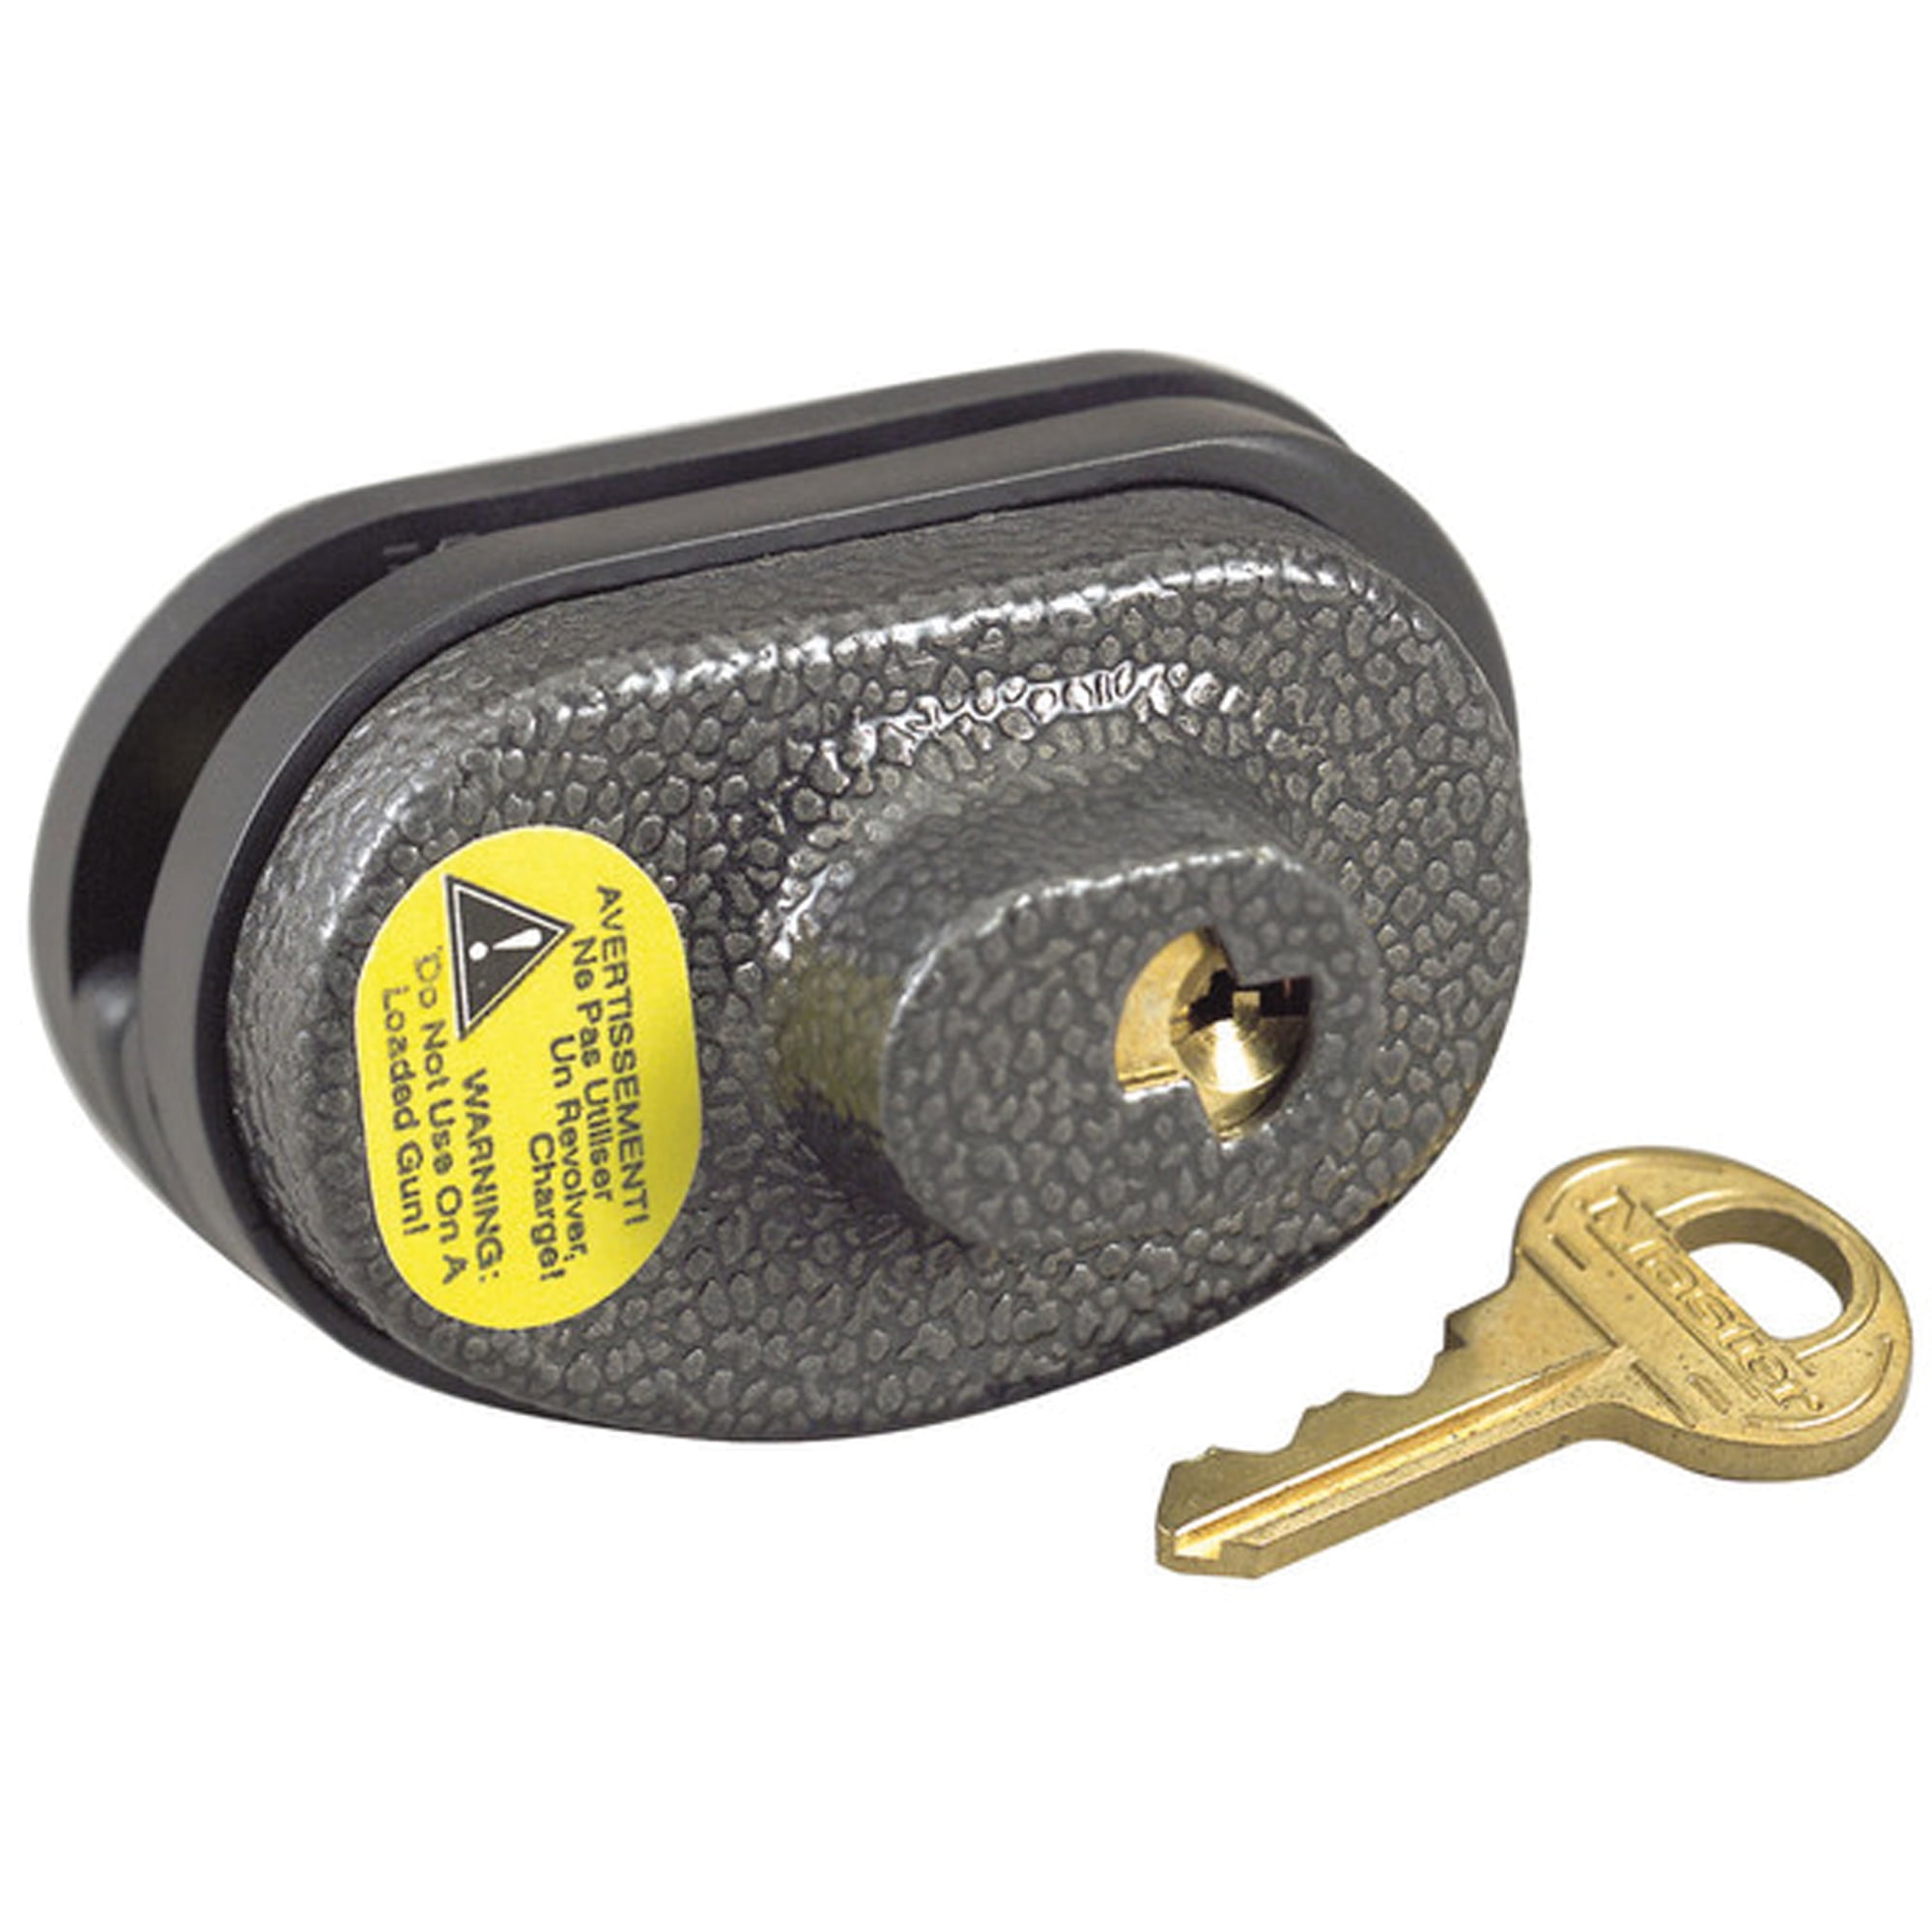 CCOP USA Key Trigger Lock for Firearms 9993501 